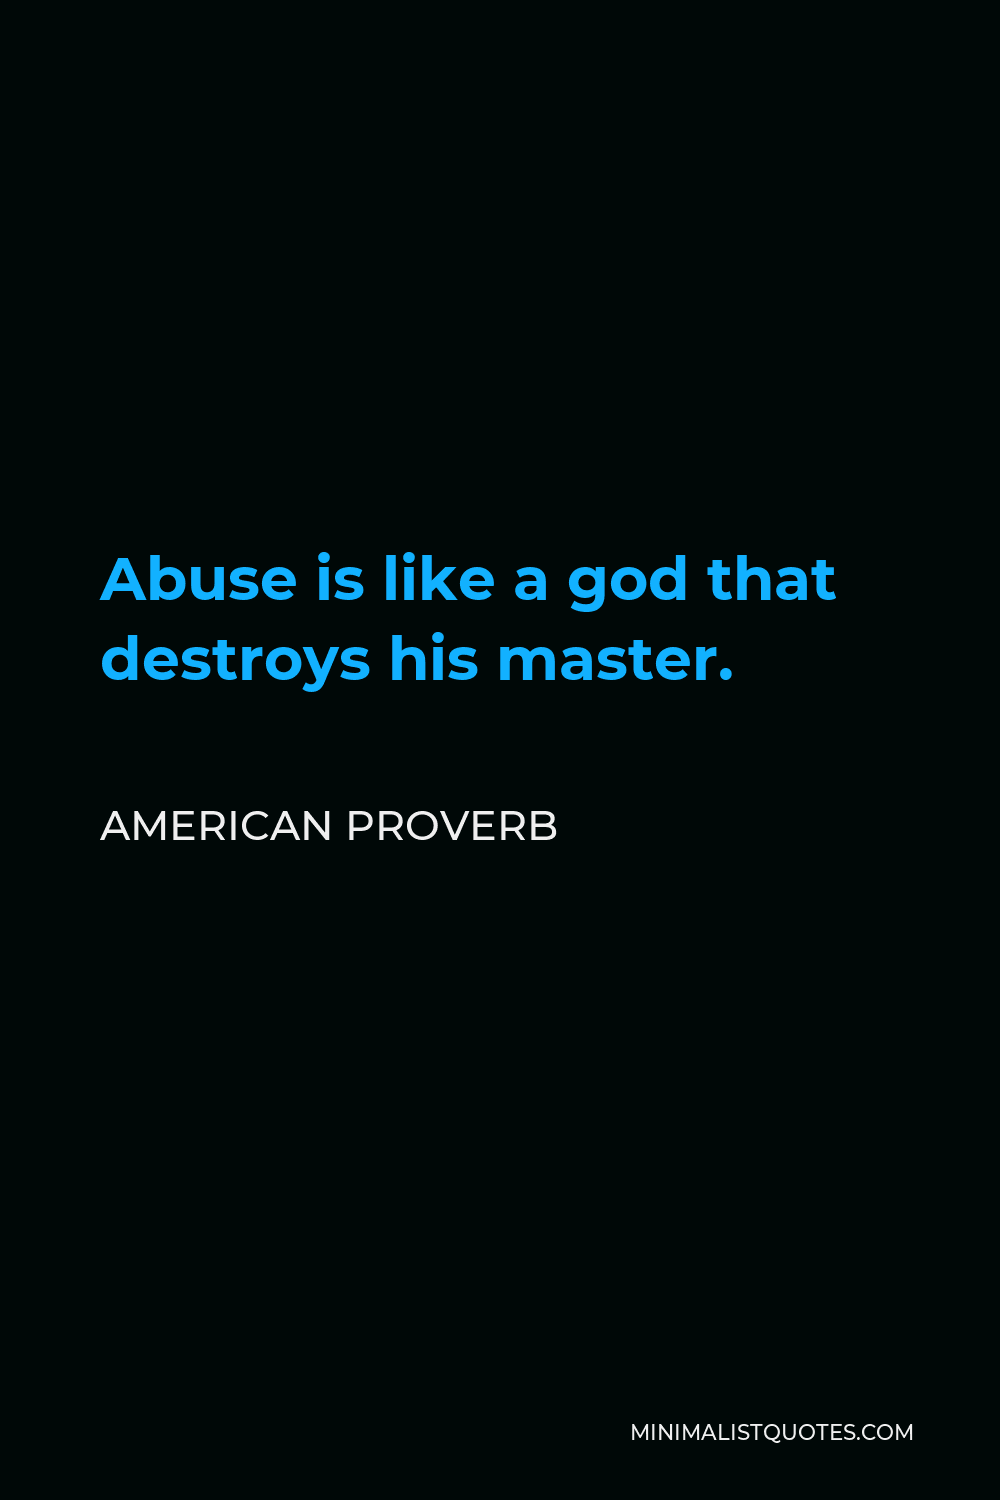 American Proverb Quote - Abuse is like a god that destroys his master.